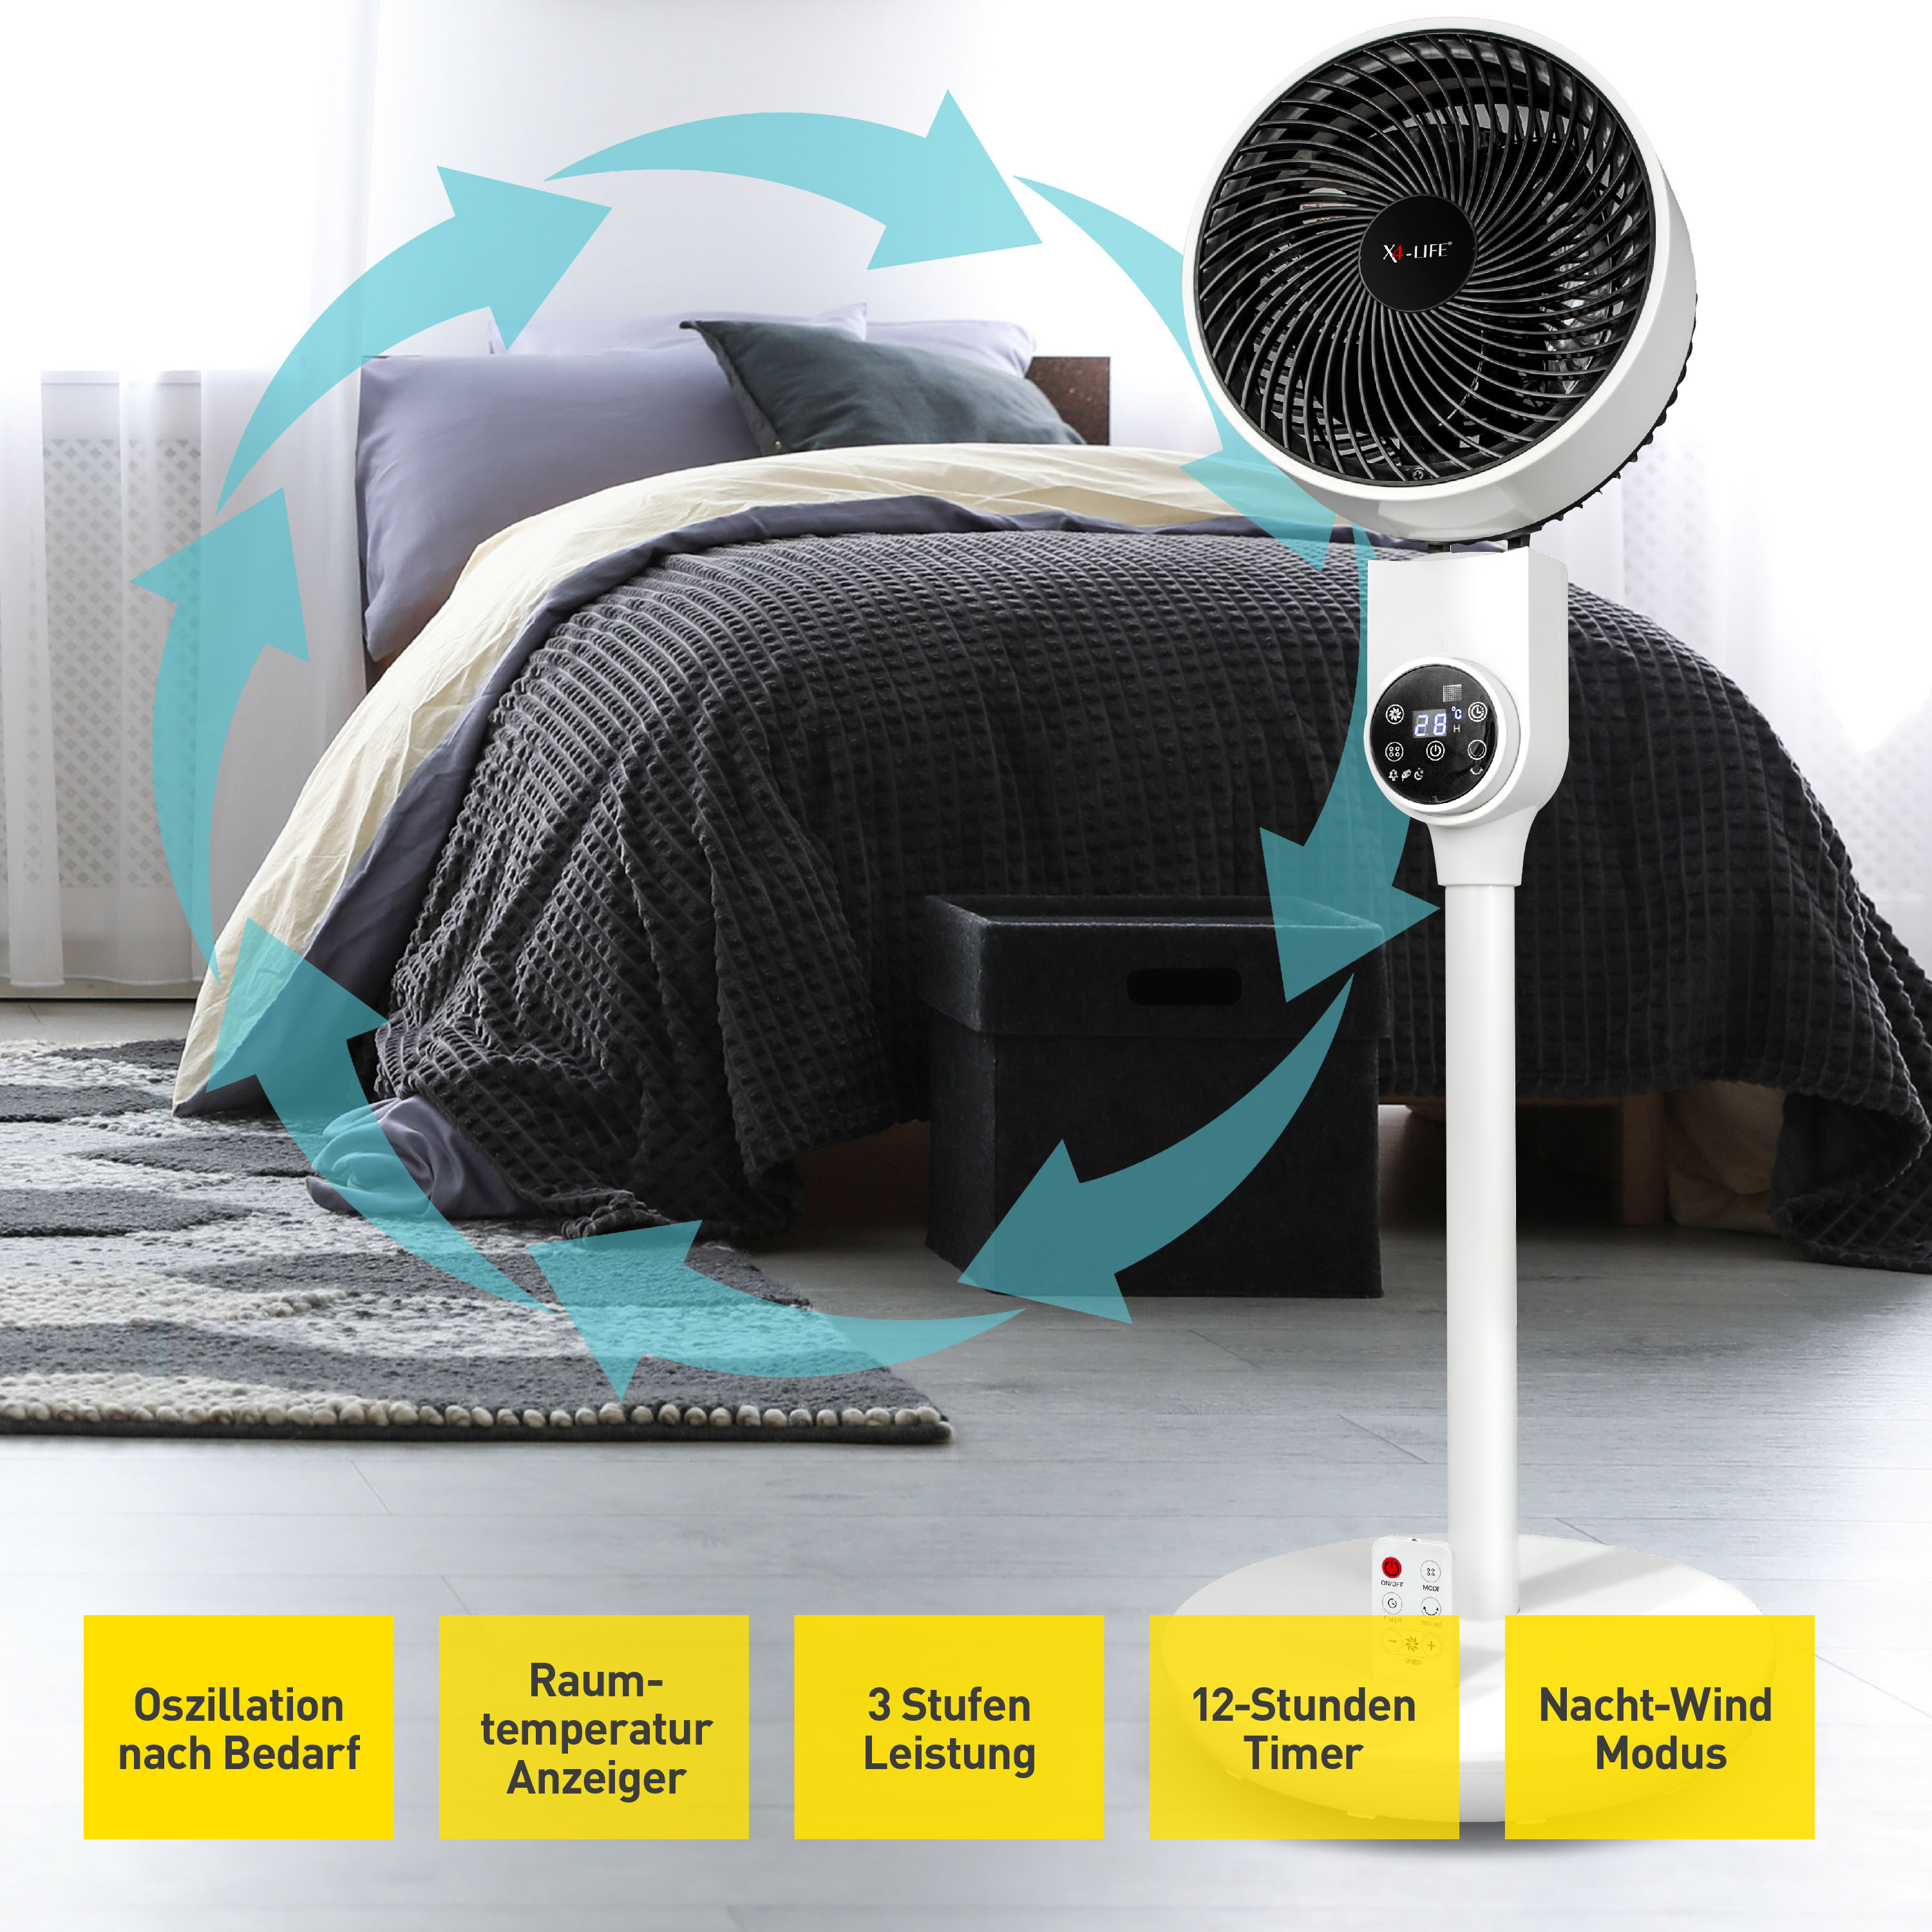 Floor Fan Pinguin DX, Floor Fan with Touch Control, Timer, and Remote Control, Oscillation, Quiet and Energy-Efficient